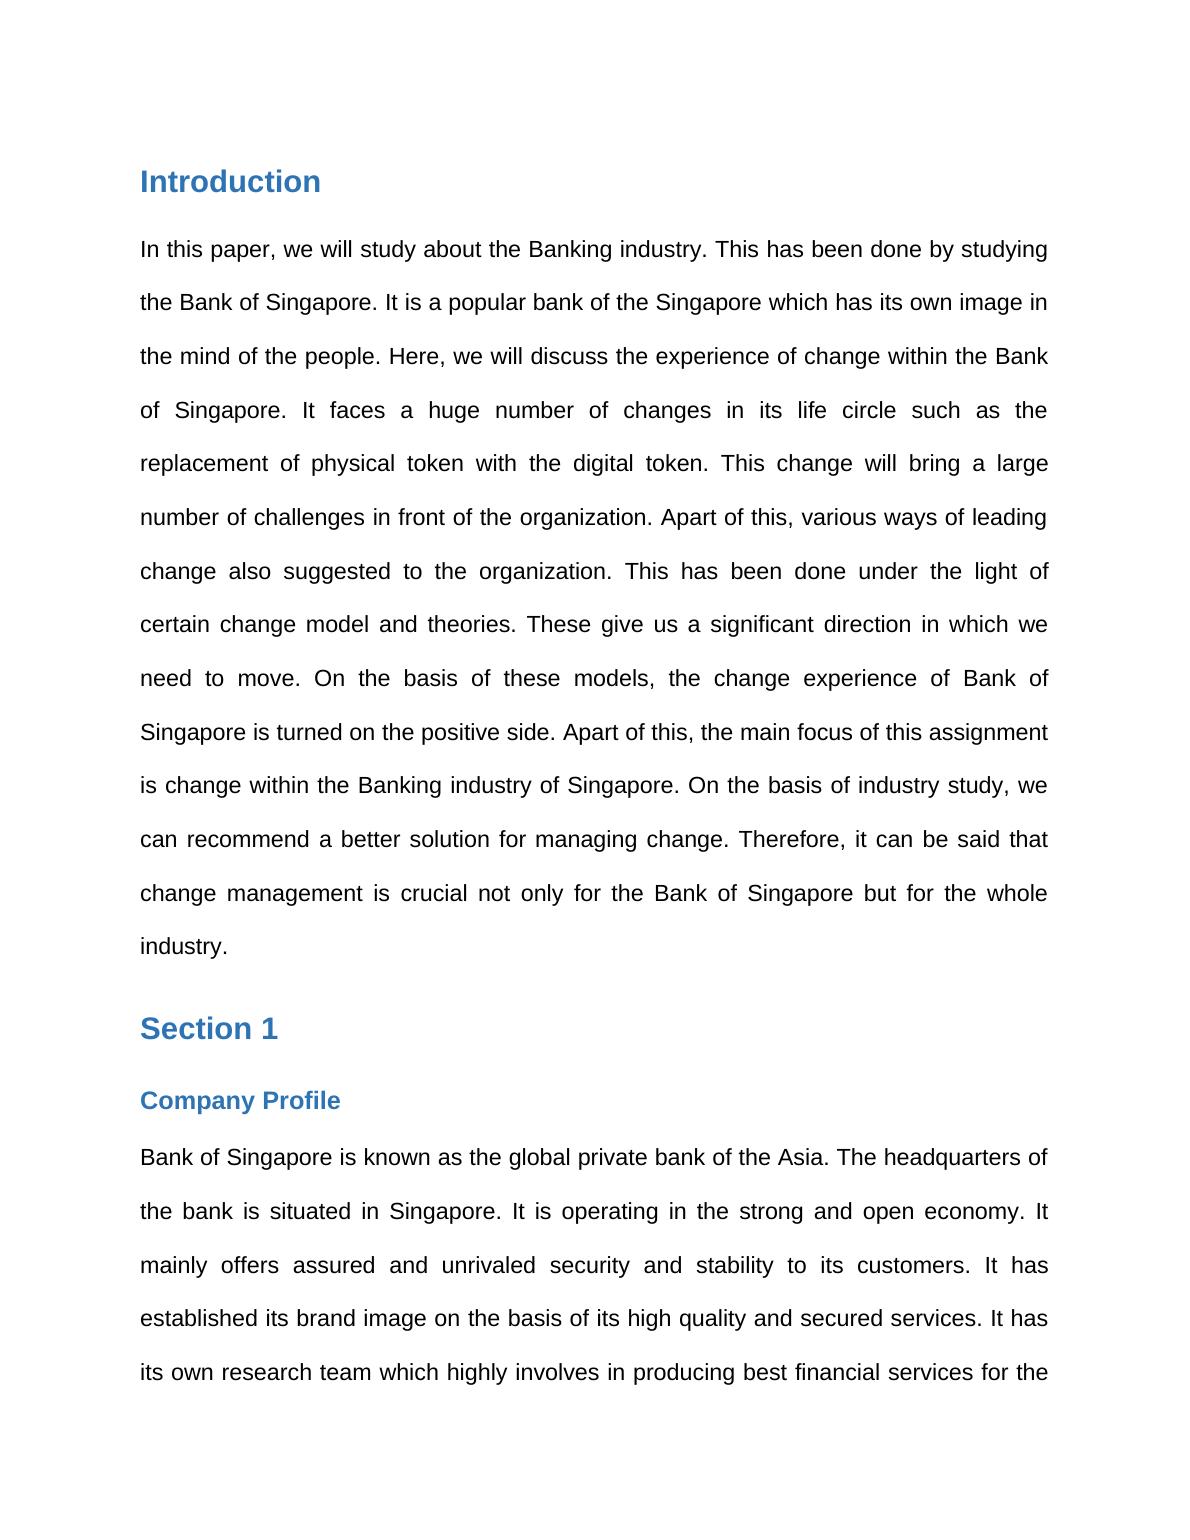 Paper on Banking Industry: Bank of Singapore_3